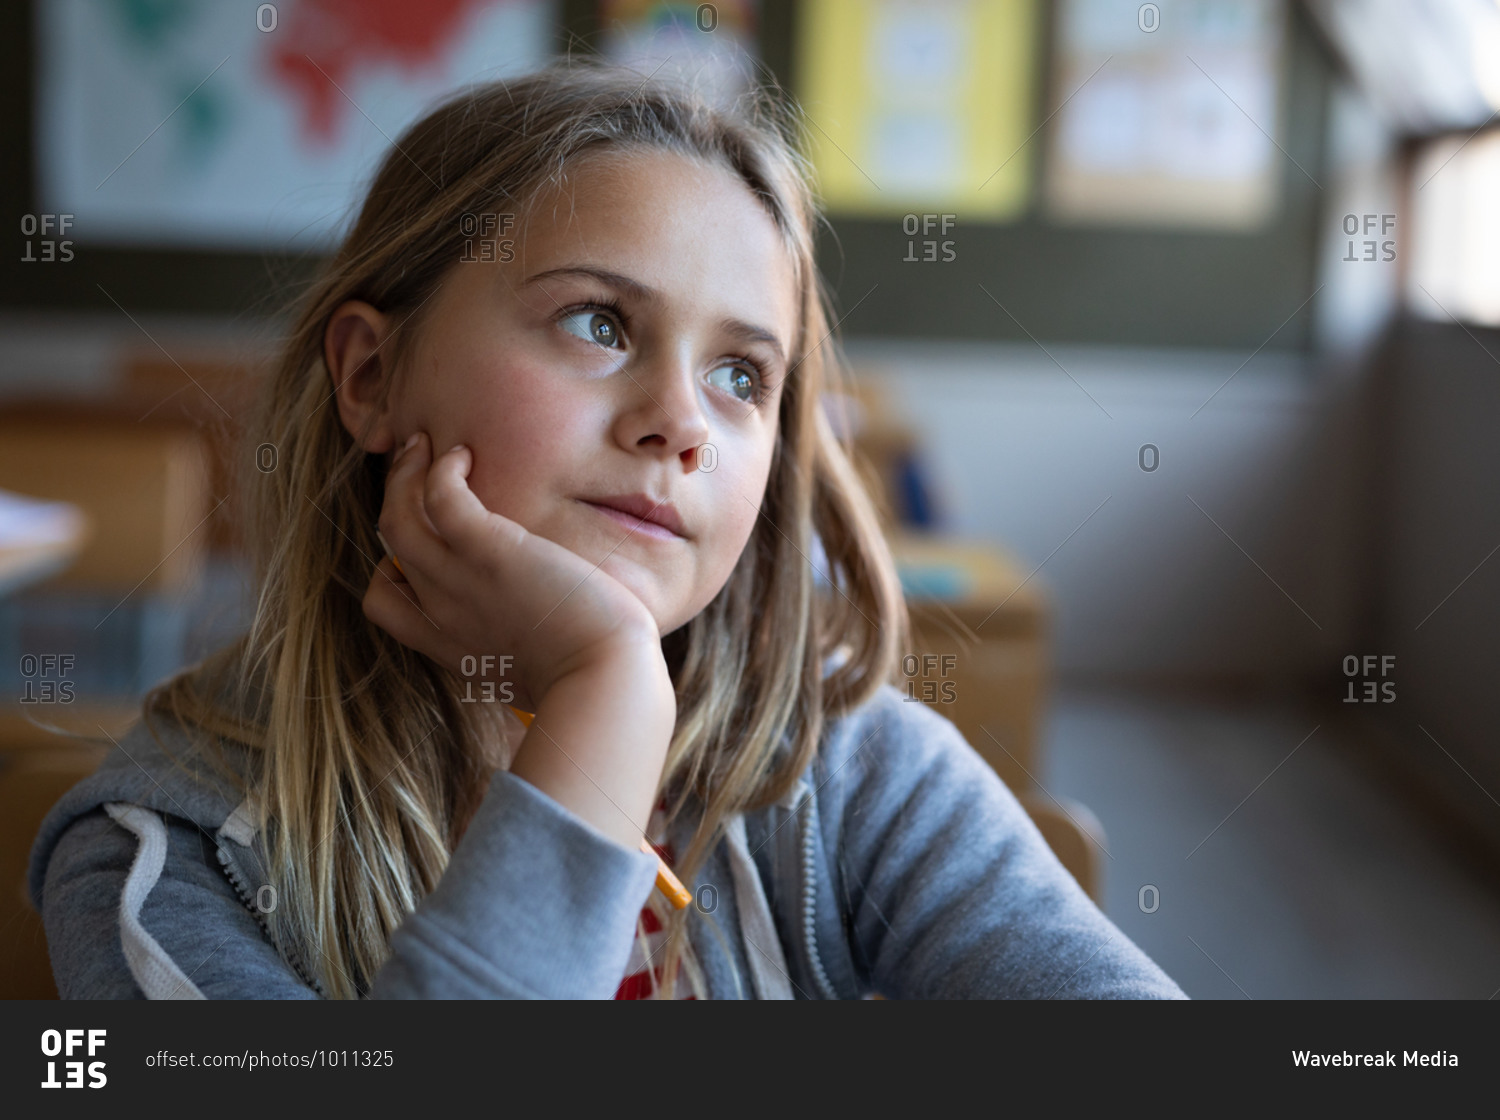 Thoughtful Caucasian girl sitting on her desk at school. Primary education social distancing health safety during Covid19 Coronavirus pandemic.